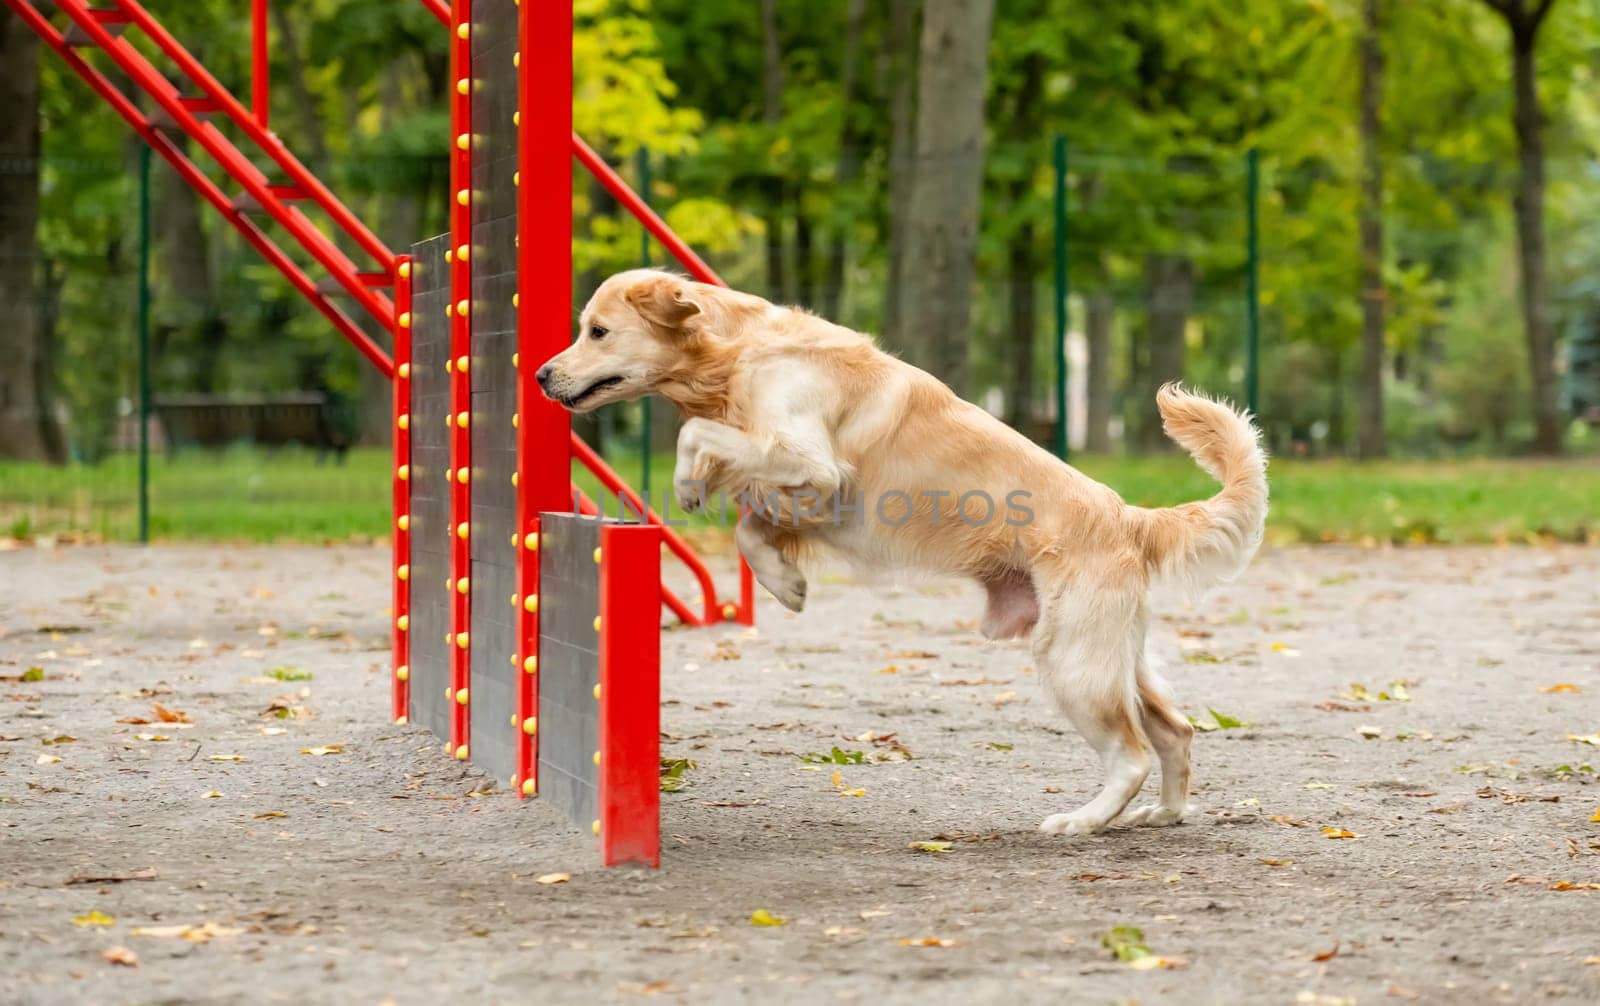 Golden retriever dog exercising in the autumn park outdoors. Purebred doggy pet jumping